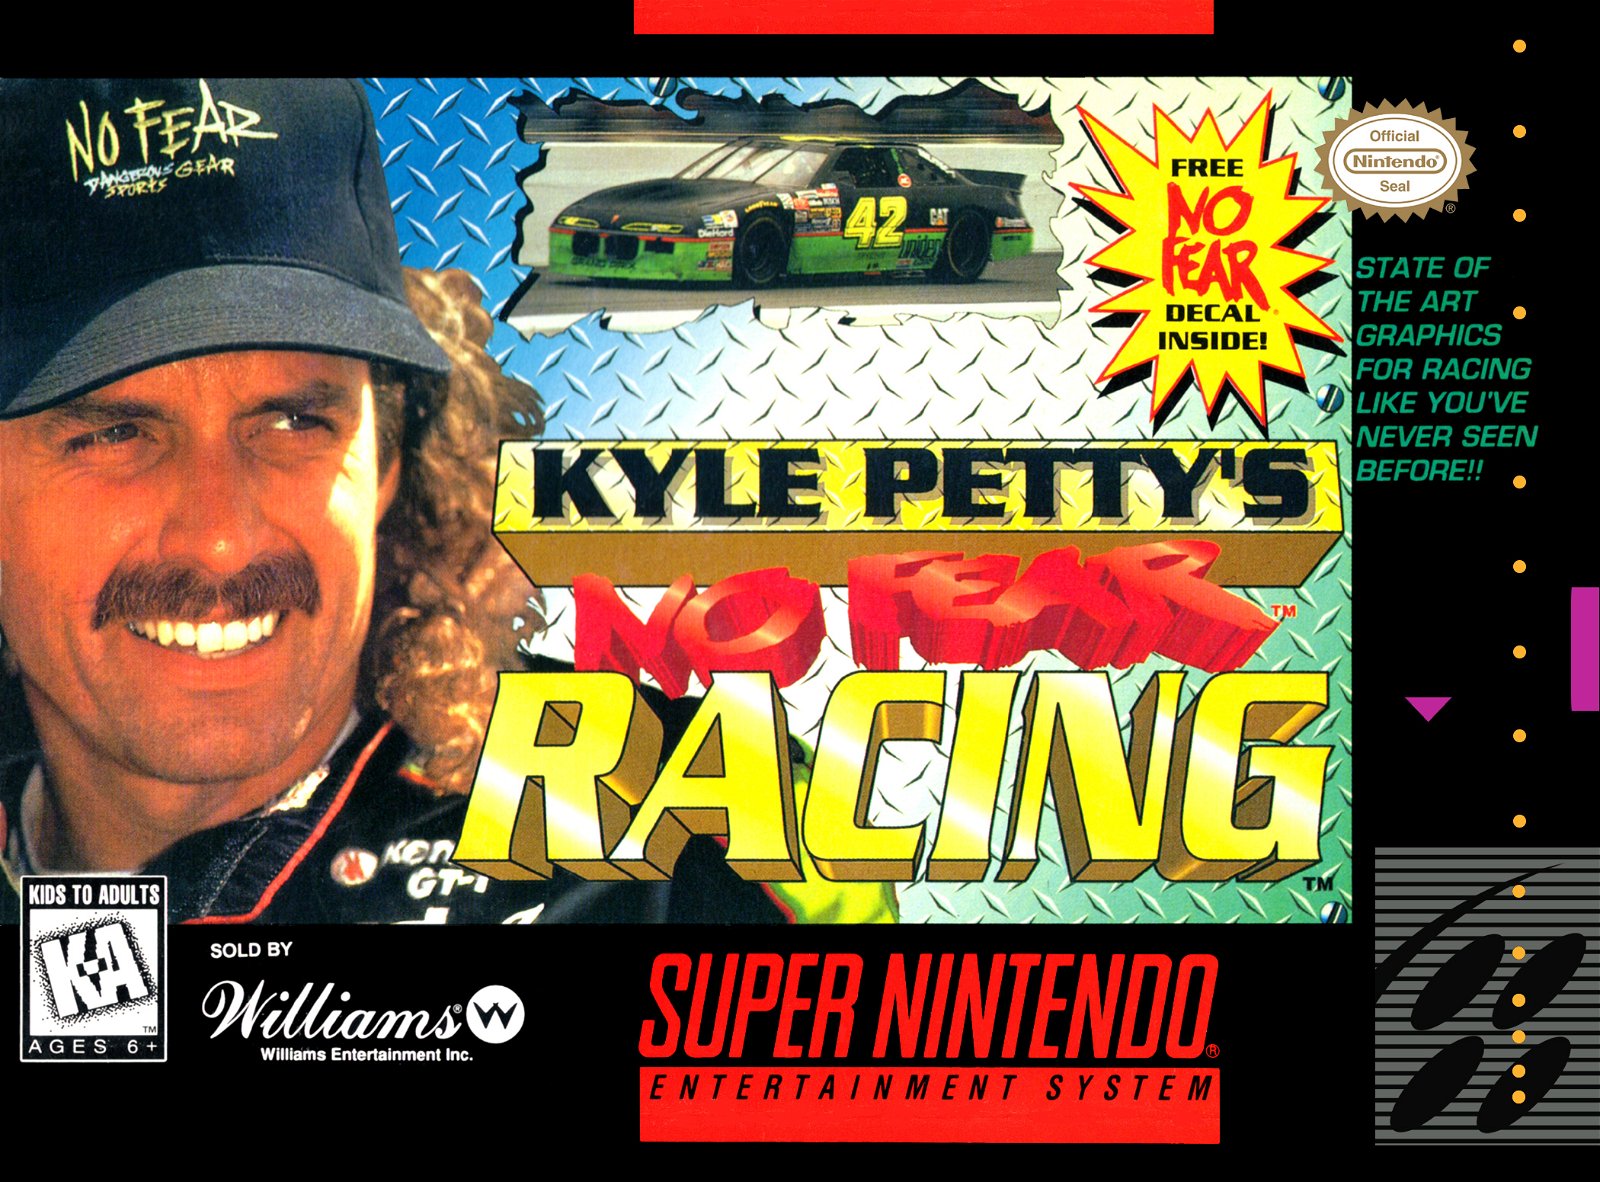 Image of Kyle Petty's No Fear Racing